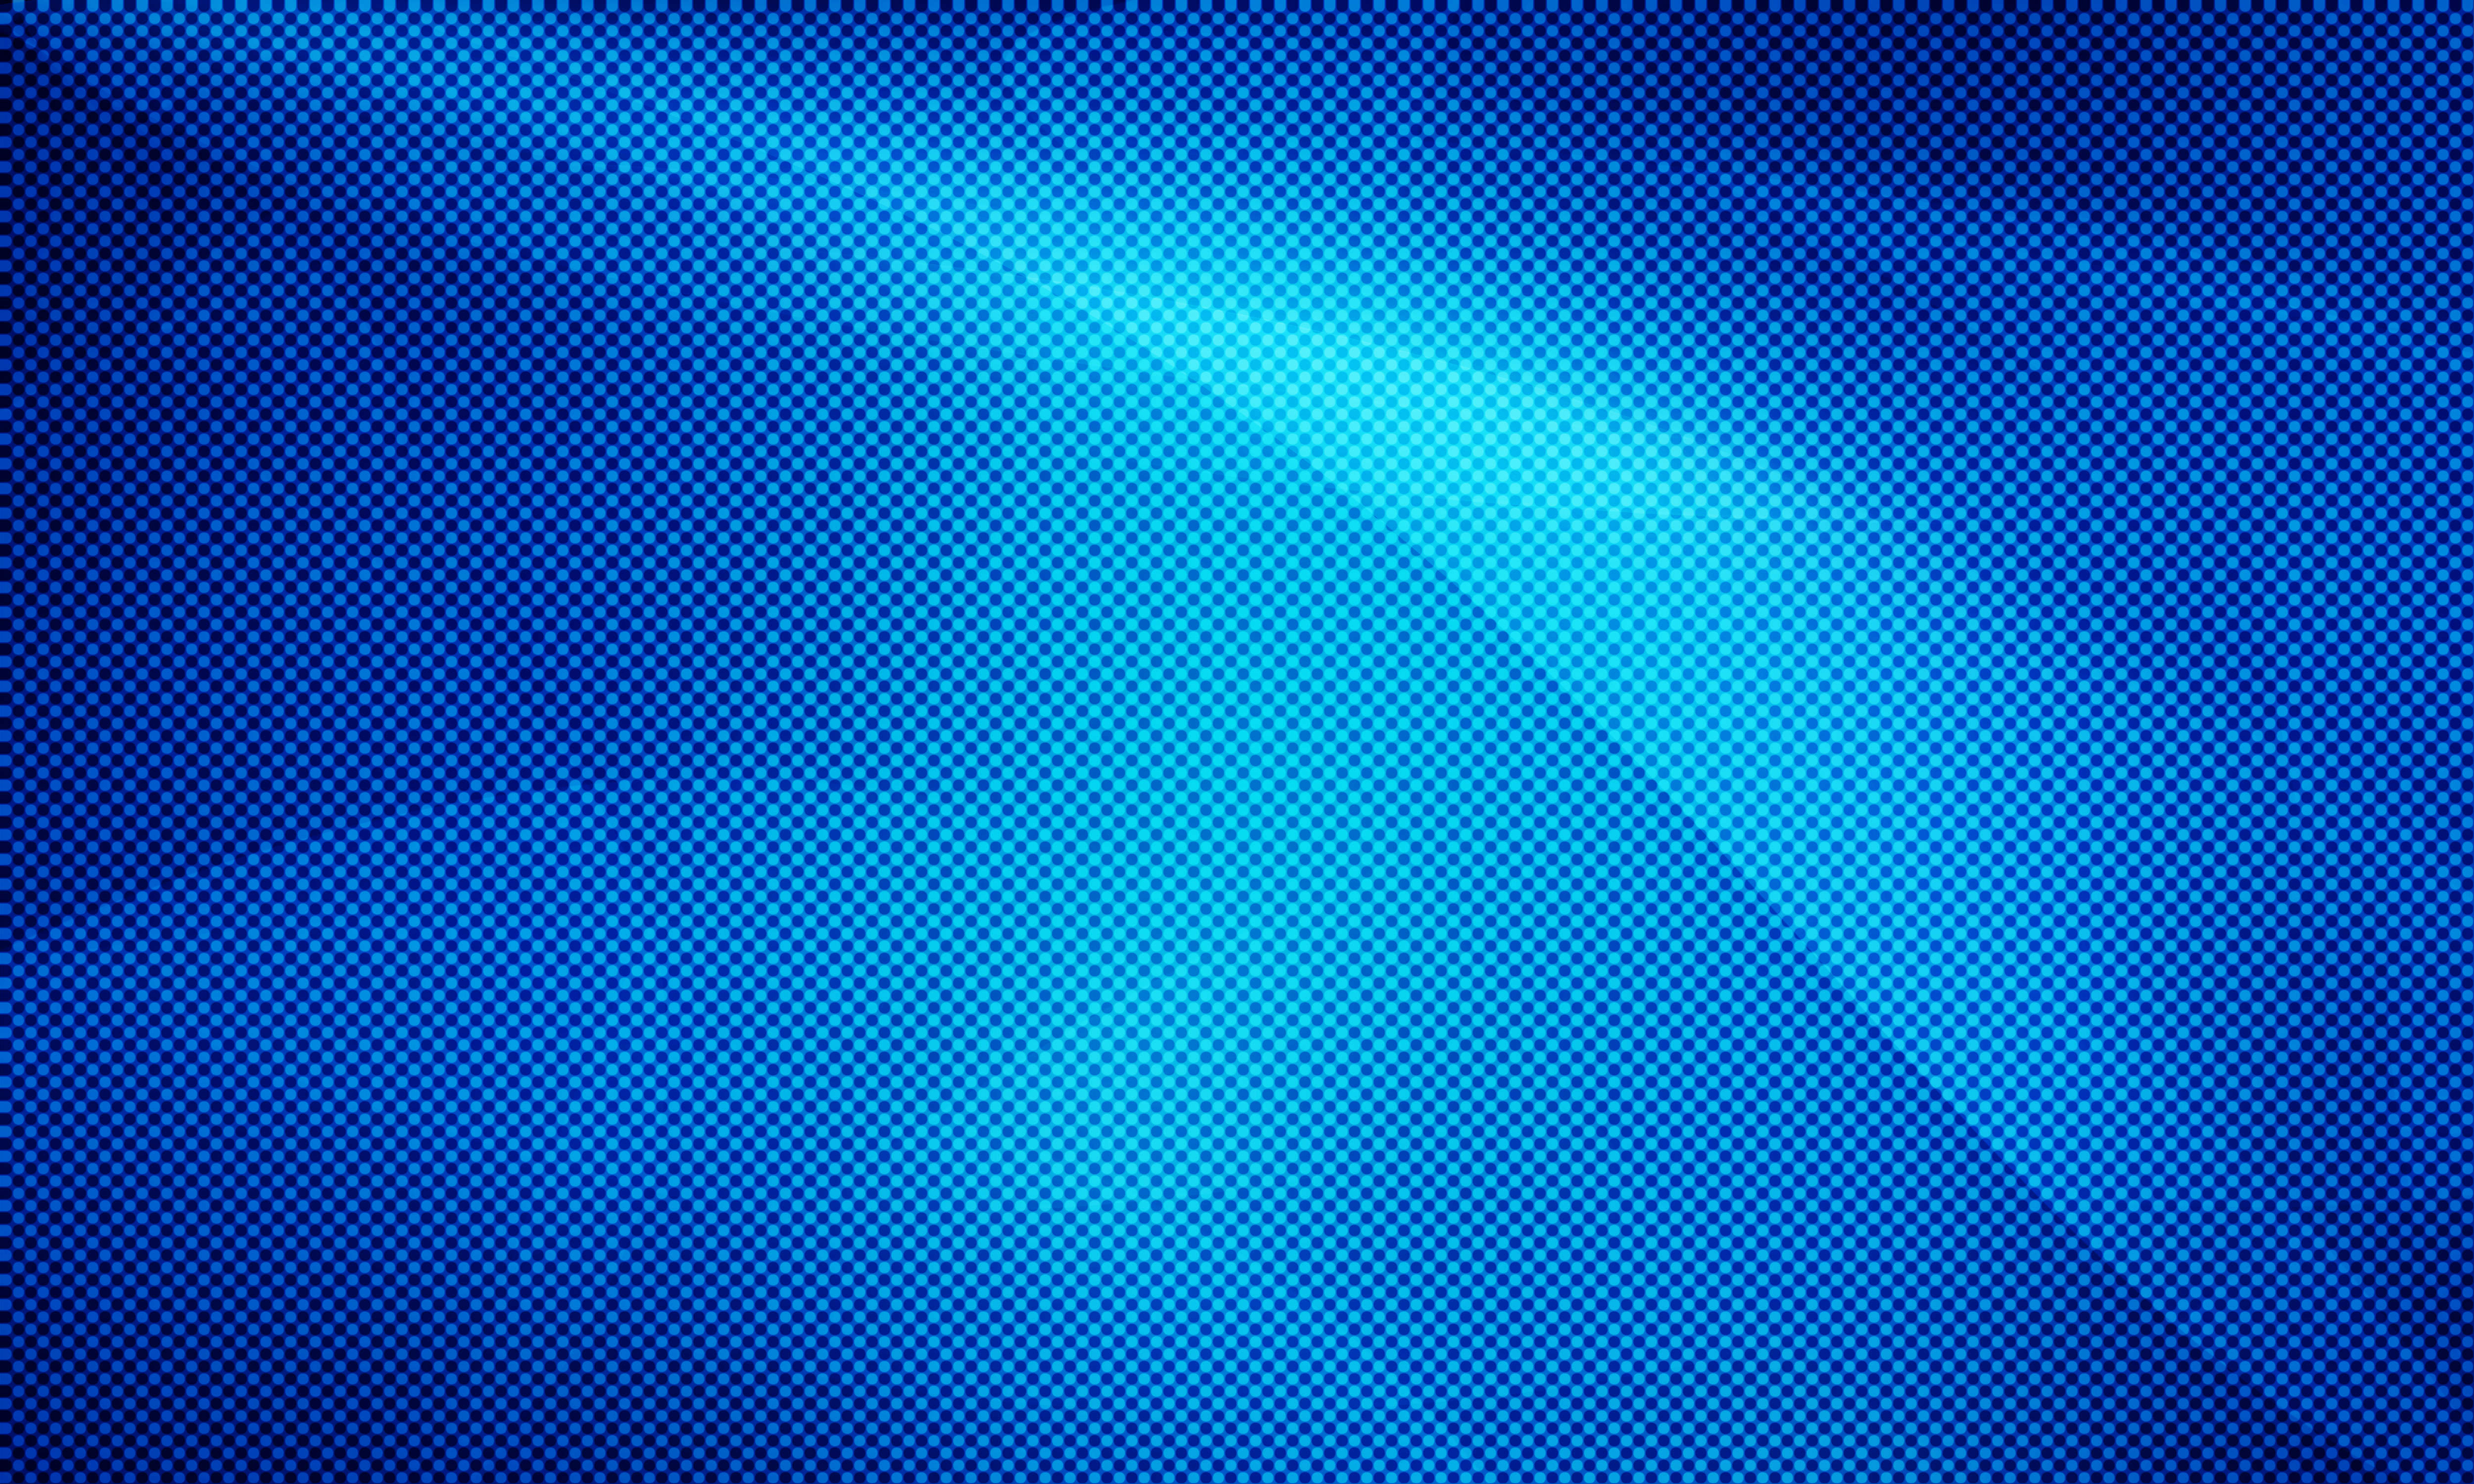 FREE 20+ Blue Abstract Background Texture Designs in PSD | Vector EPS